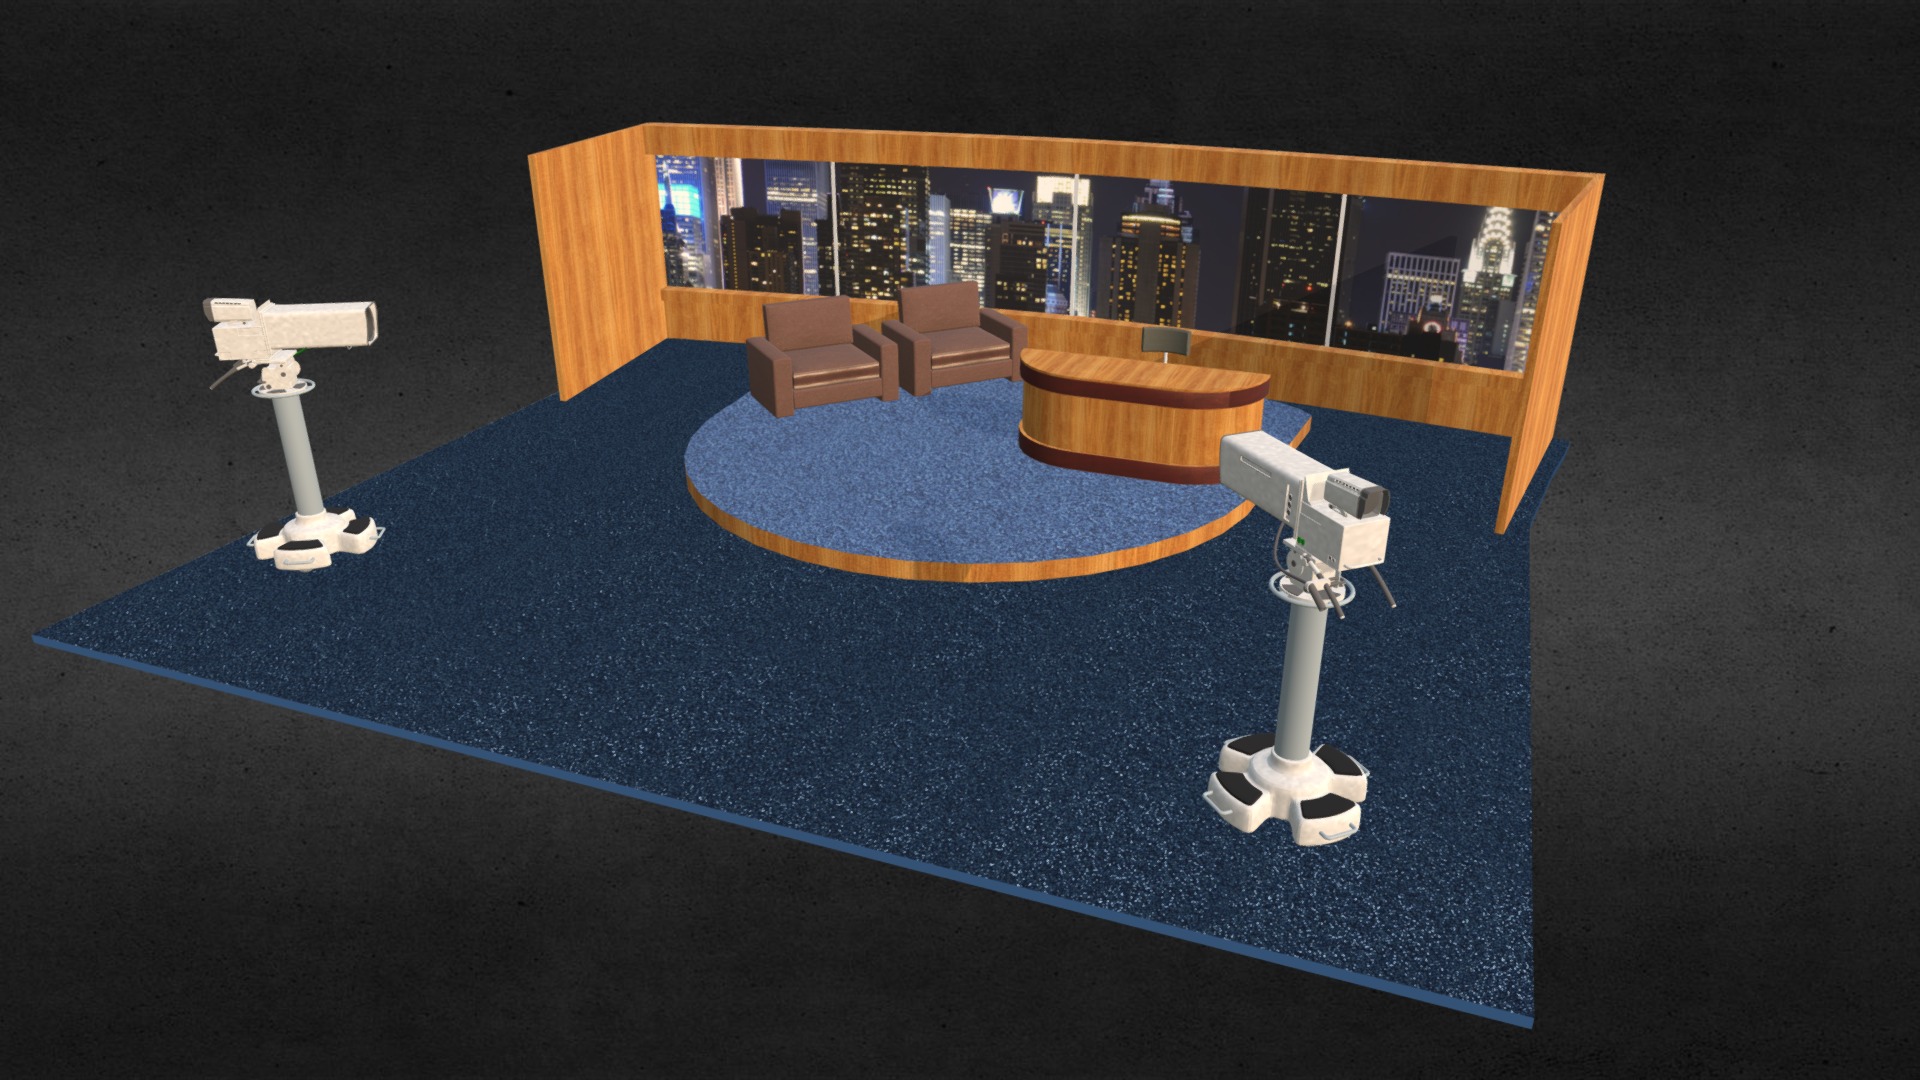 This is a typical late night TV show set. Your host or hostess can sit behind the desk and interview the guests sitting in the chairs. A sidekick or second guest can sit in the other chair. Two cameras can record or broadcast the interviews.


Detailed model, with 86,763 polygons.
Made with 3 and 4-point polygons.
Includes group information, which your software should interpret as separate parts: All 3 chairs, desk, and 2 cameras
The model is UV mapped.
One color scheme with all the texture maps shown.
You'll have to apply your own metal and glass shaders.
 - Late Night TV Show Set - Buy Royalty Free 3D model by JohnHoagland 3d model